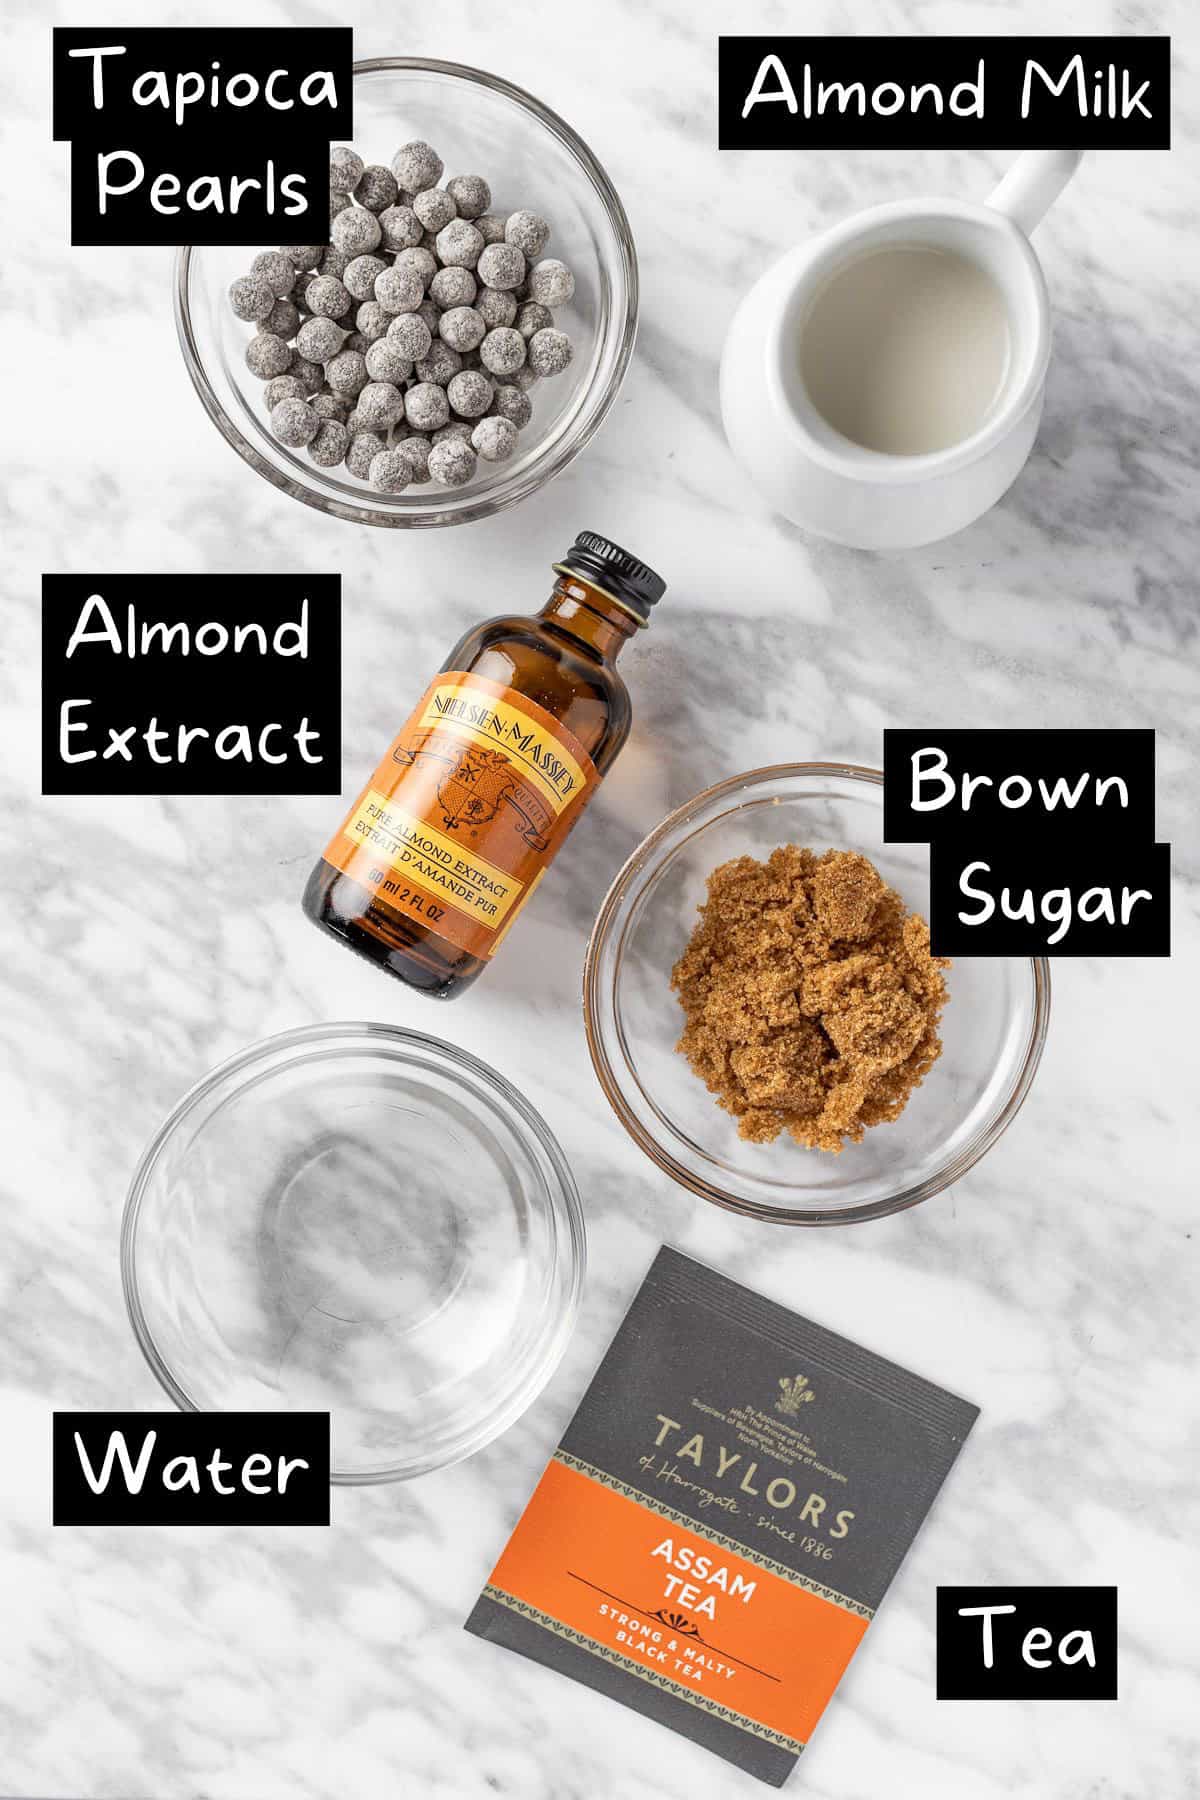 The ingredients needed to make the almond bubble tea.